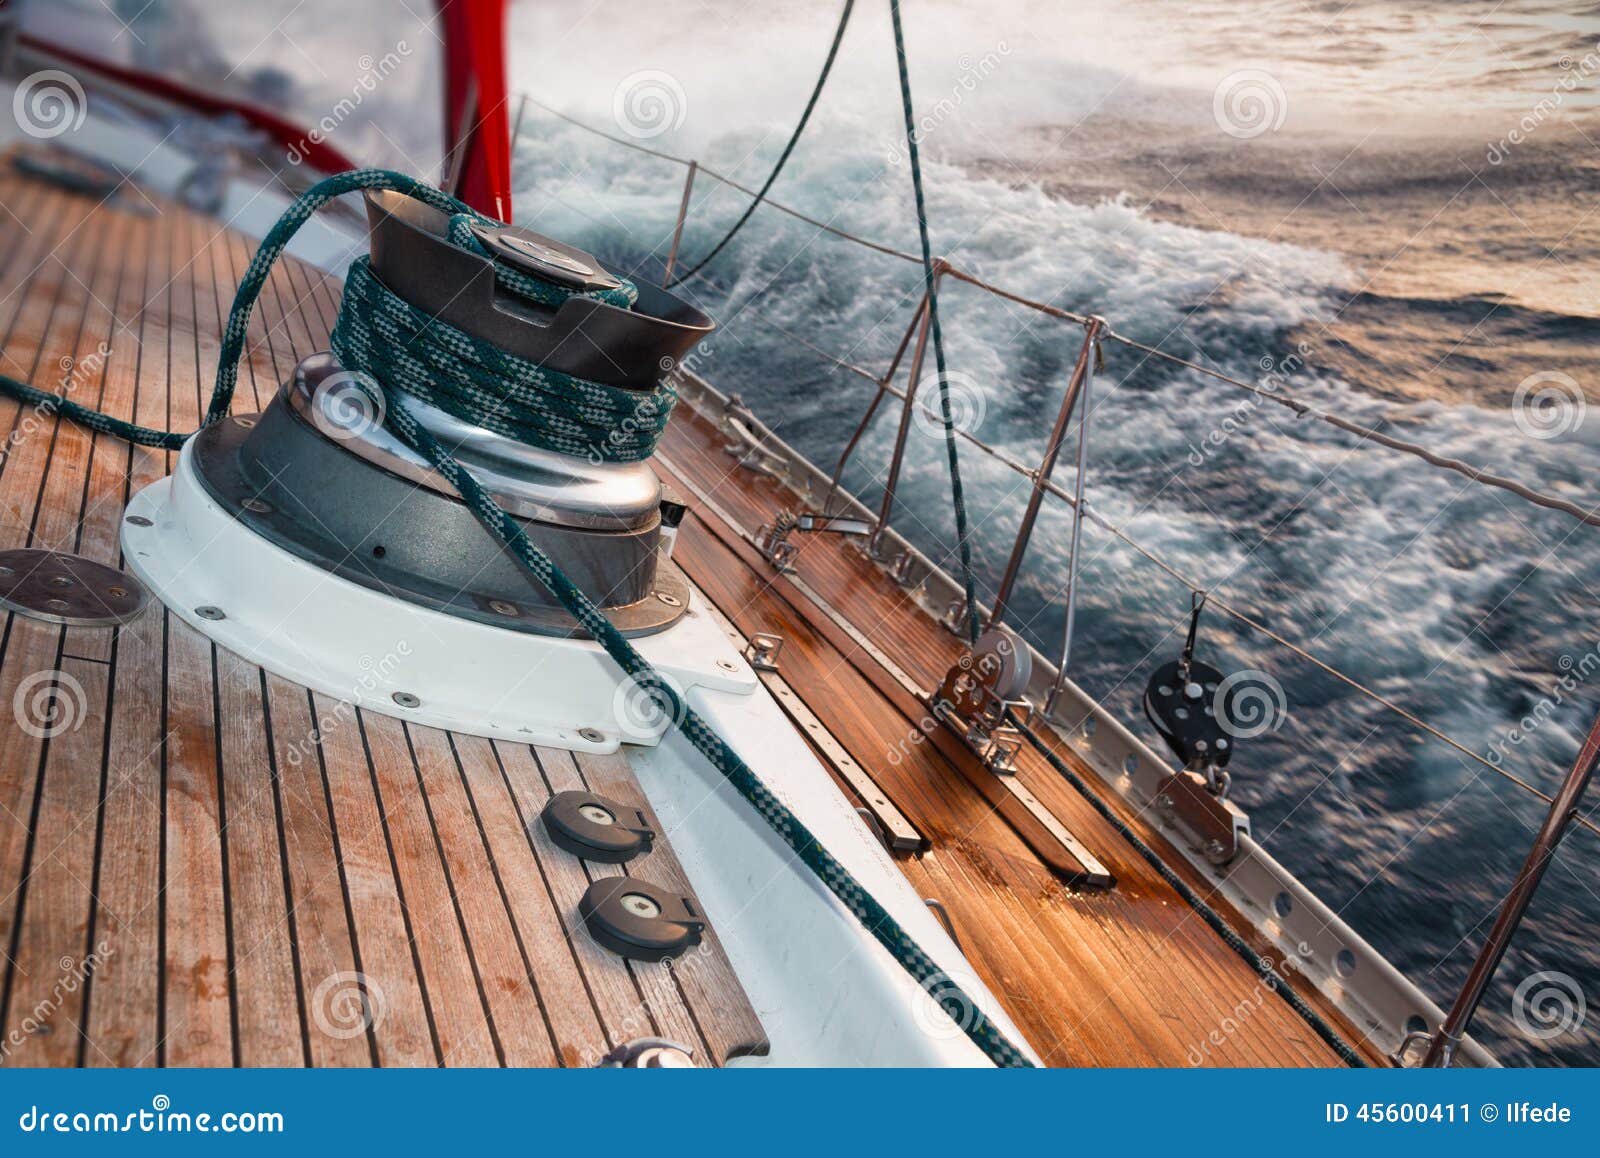 Sail boat under the storm stock image. Image of ship ...